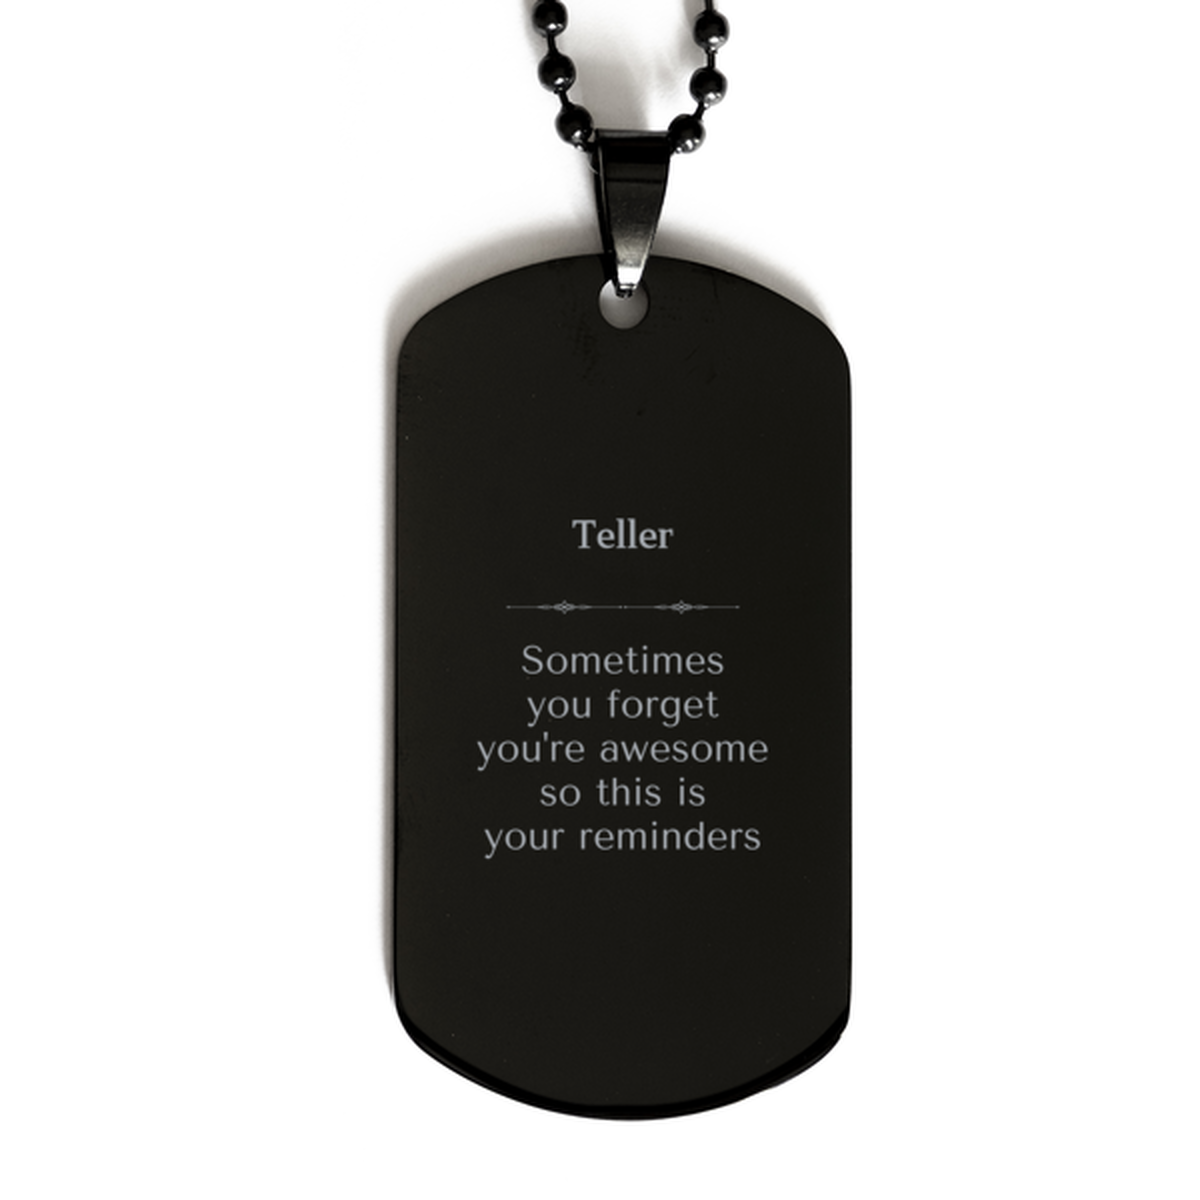 Sentimental Teller Black Dog Tag, Teller Sometimes you forget you're awesome so this is your reminders, Graduation Christmas Birthday Gifts for Teller, Men, Women, Coworkers